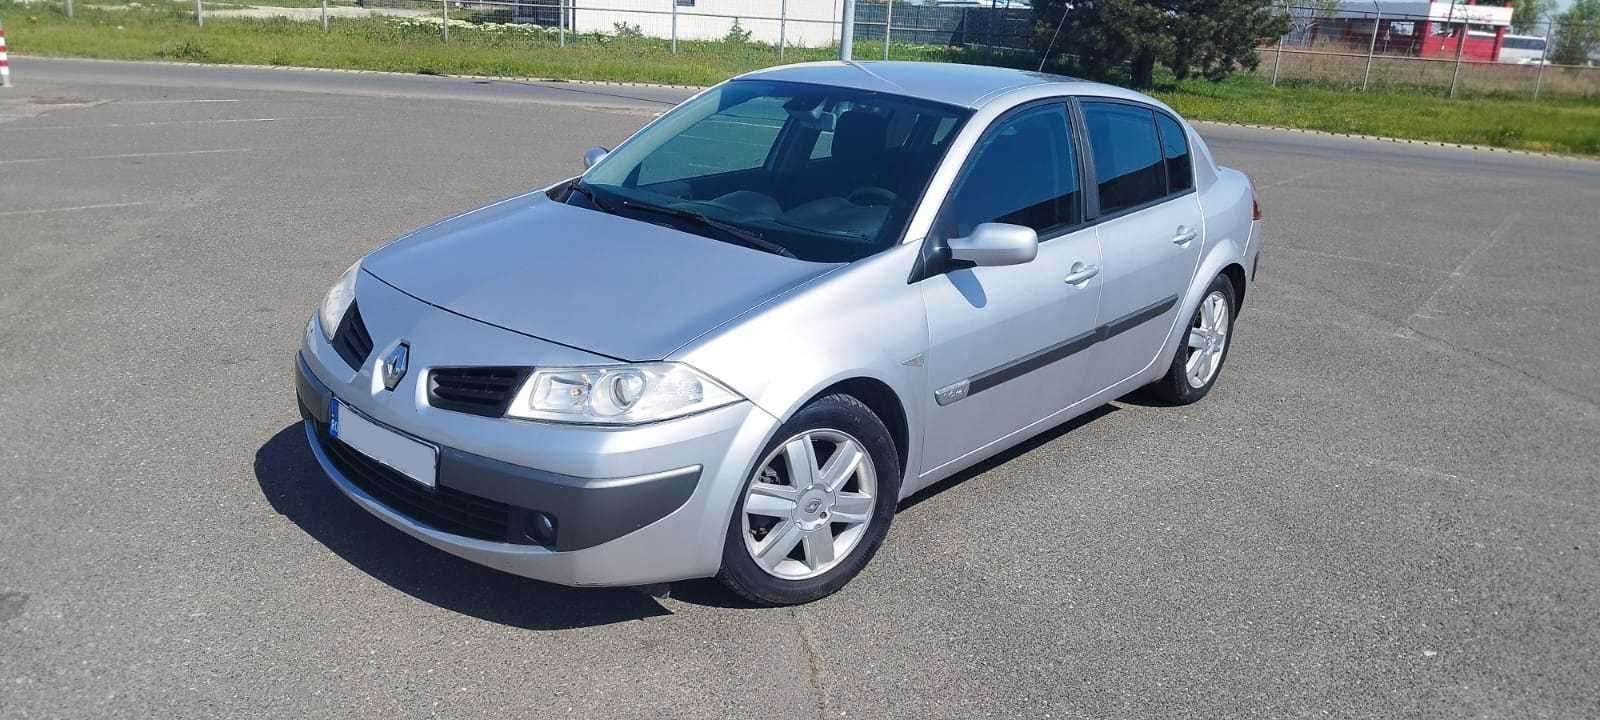 RENAULT Megane 09.2006 1.6i 111 CP E4 climatronic, inmatriculat/fiscal